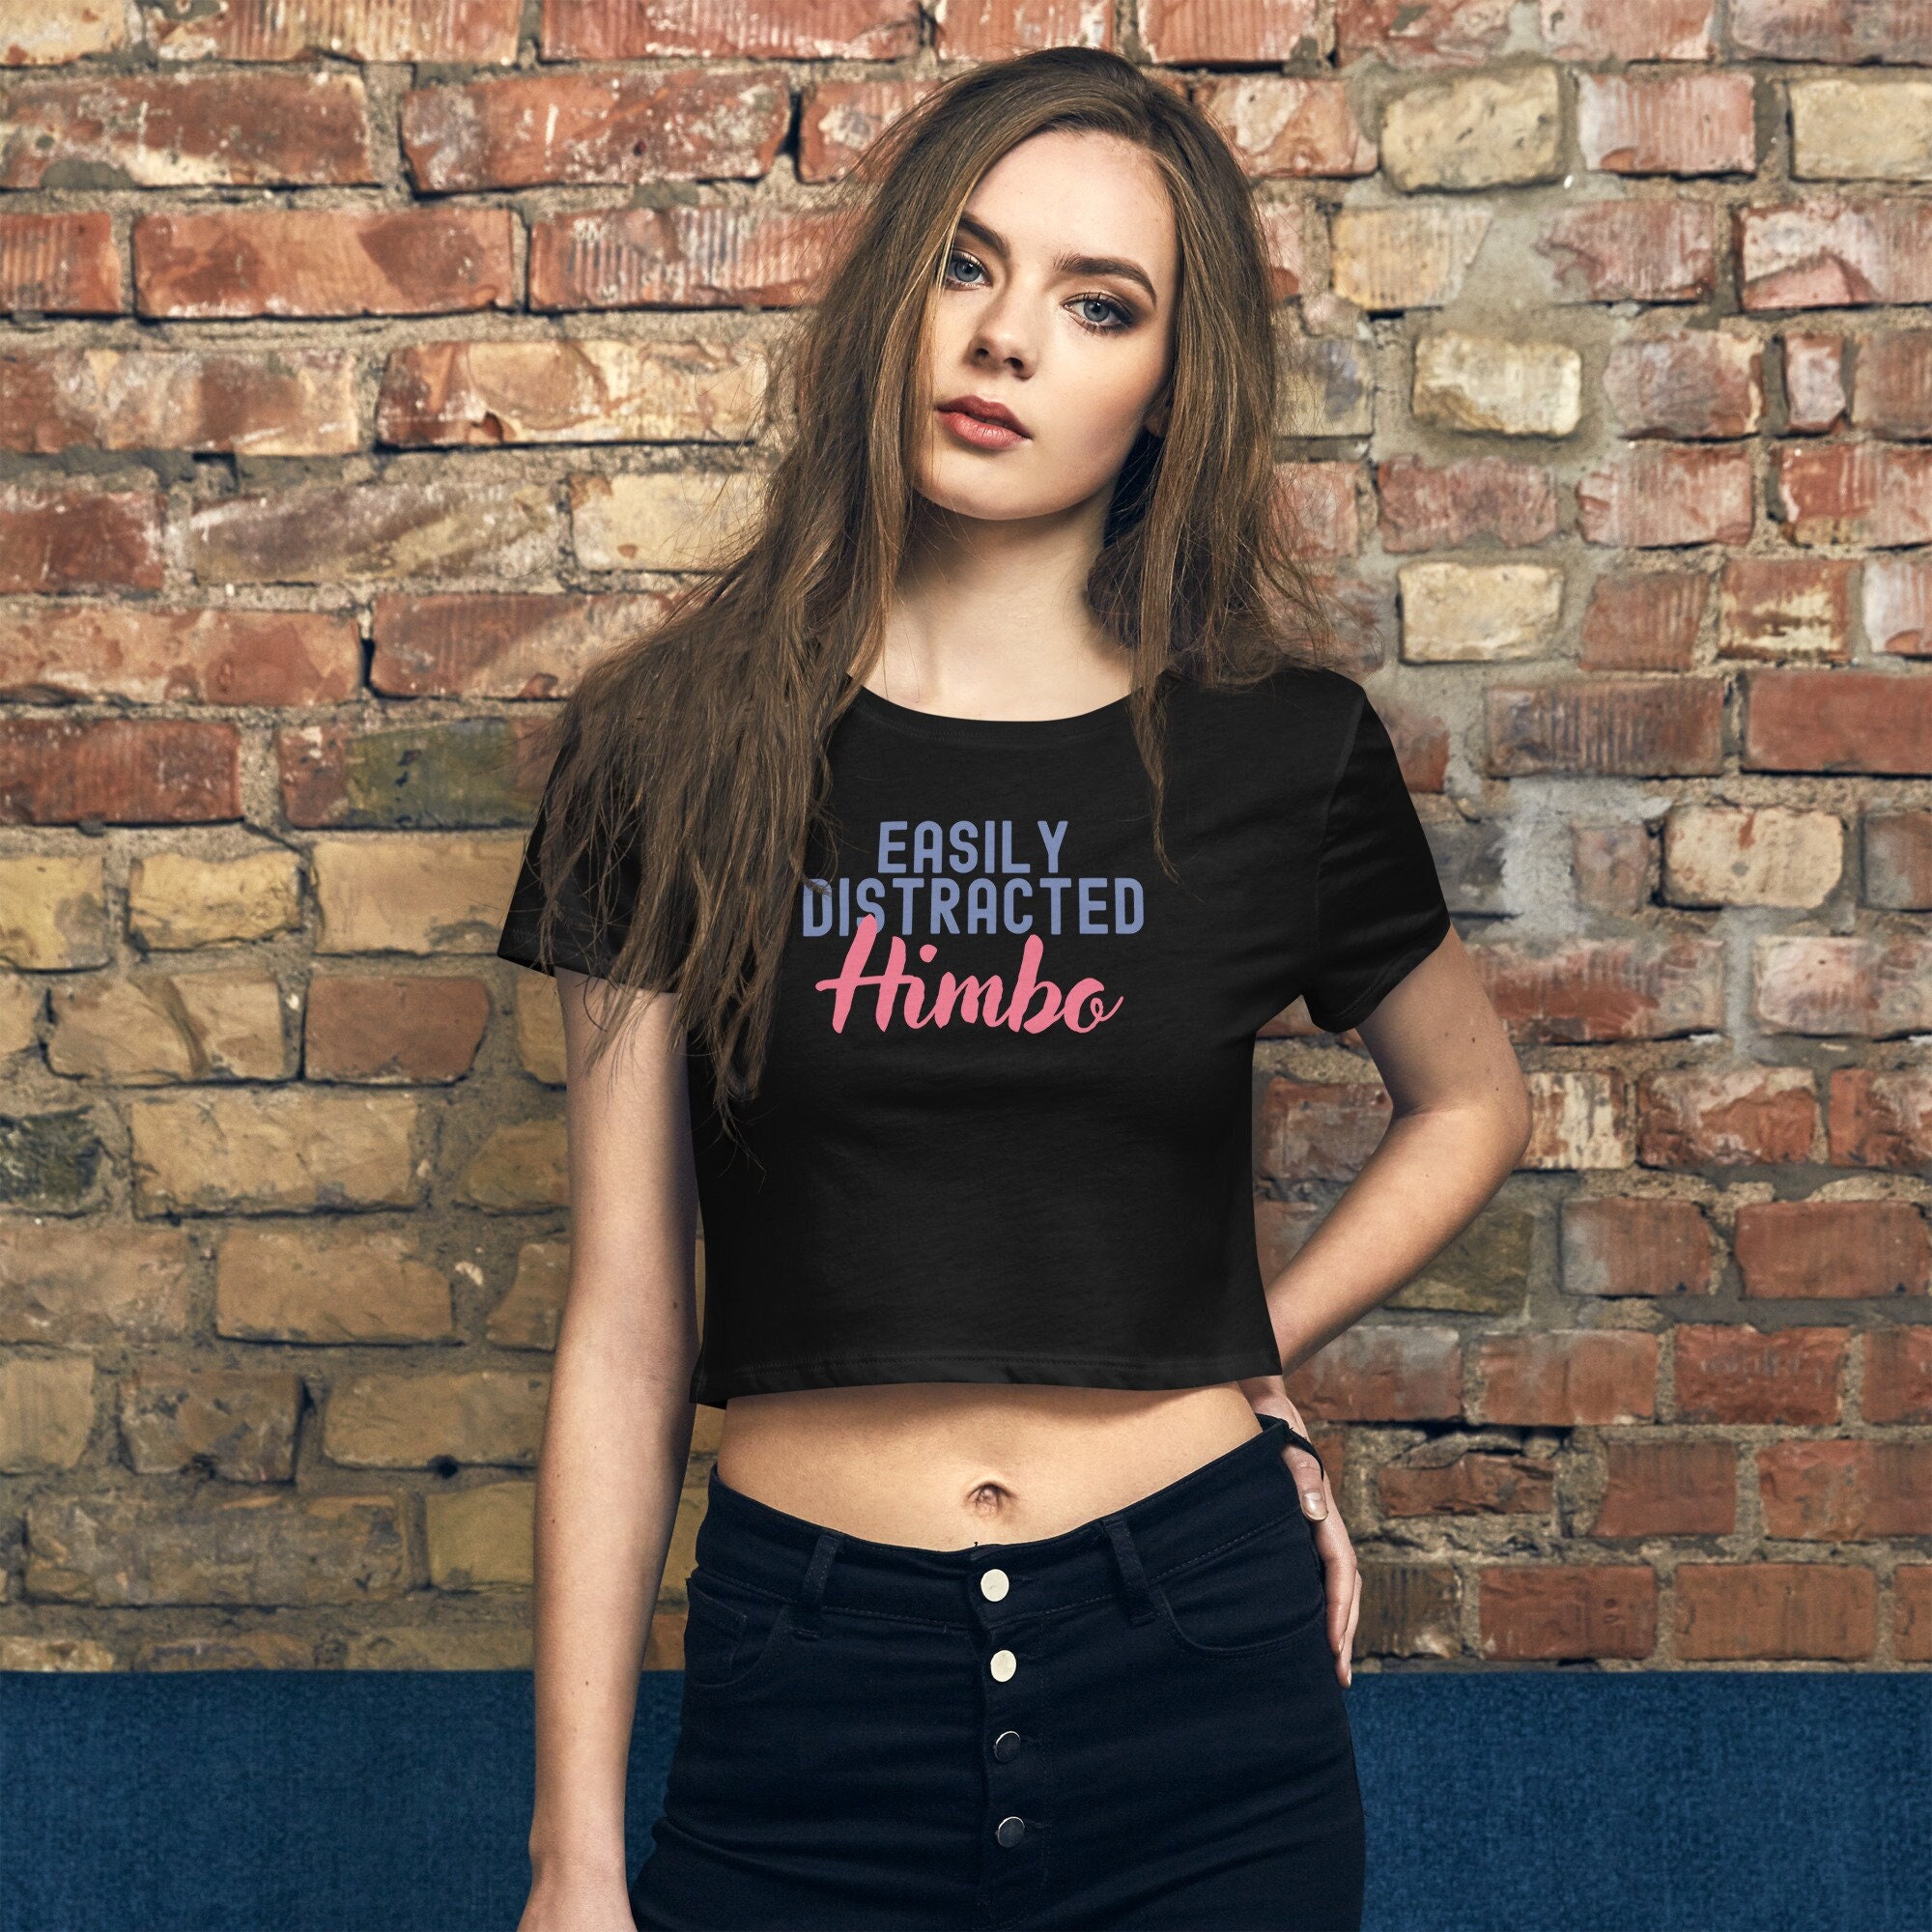 Femboy Hooters 100% Recycled T-shirt Femboy Clothes Weeb Femboys Sissies  LGBTQIA Catboy -  Sweden